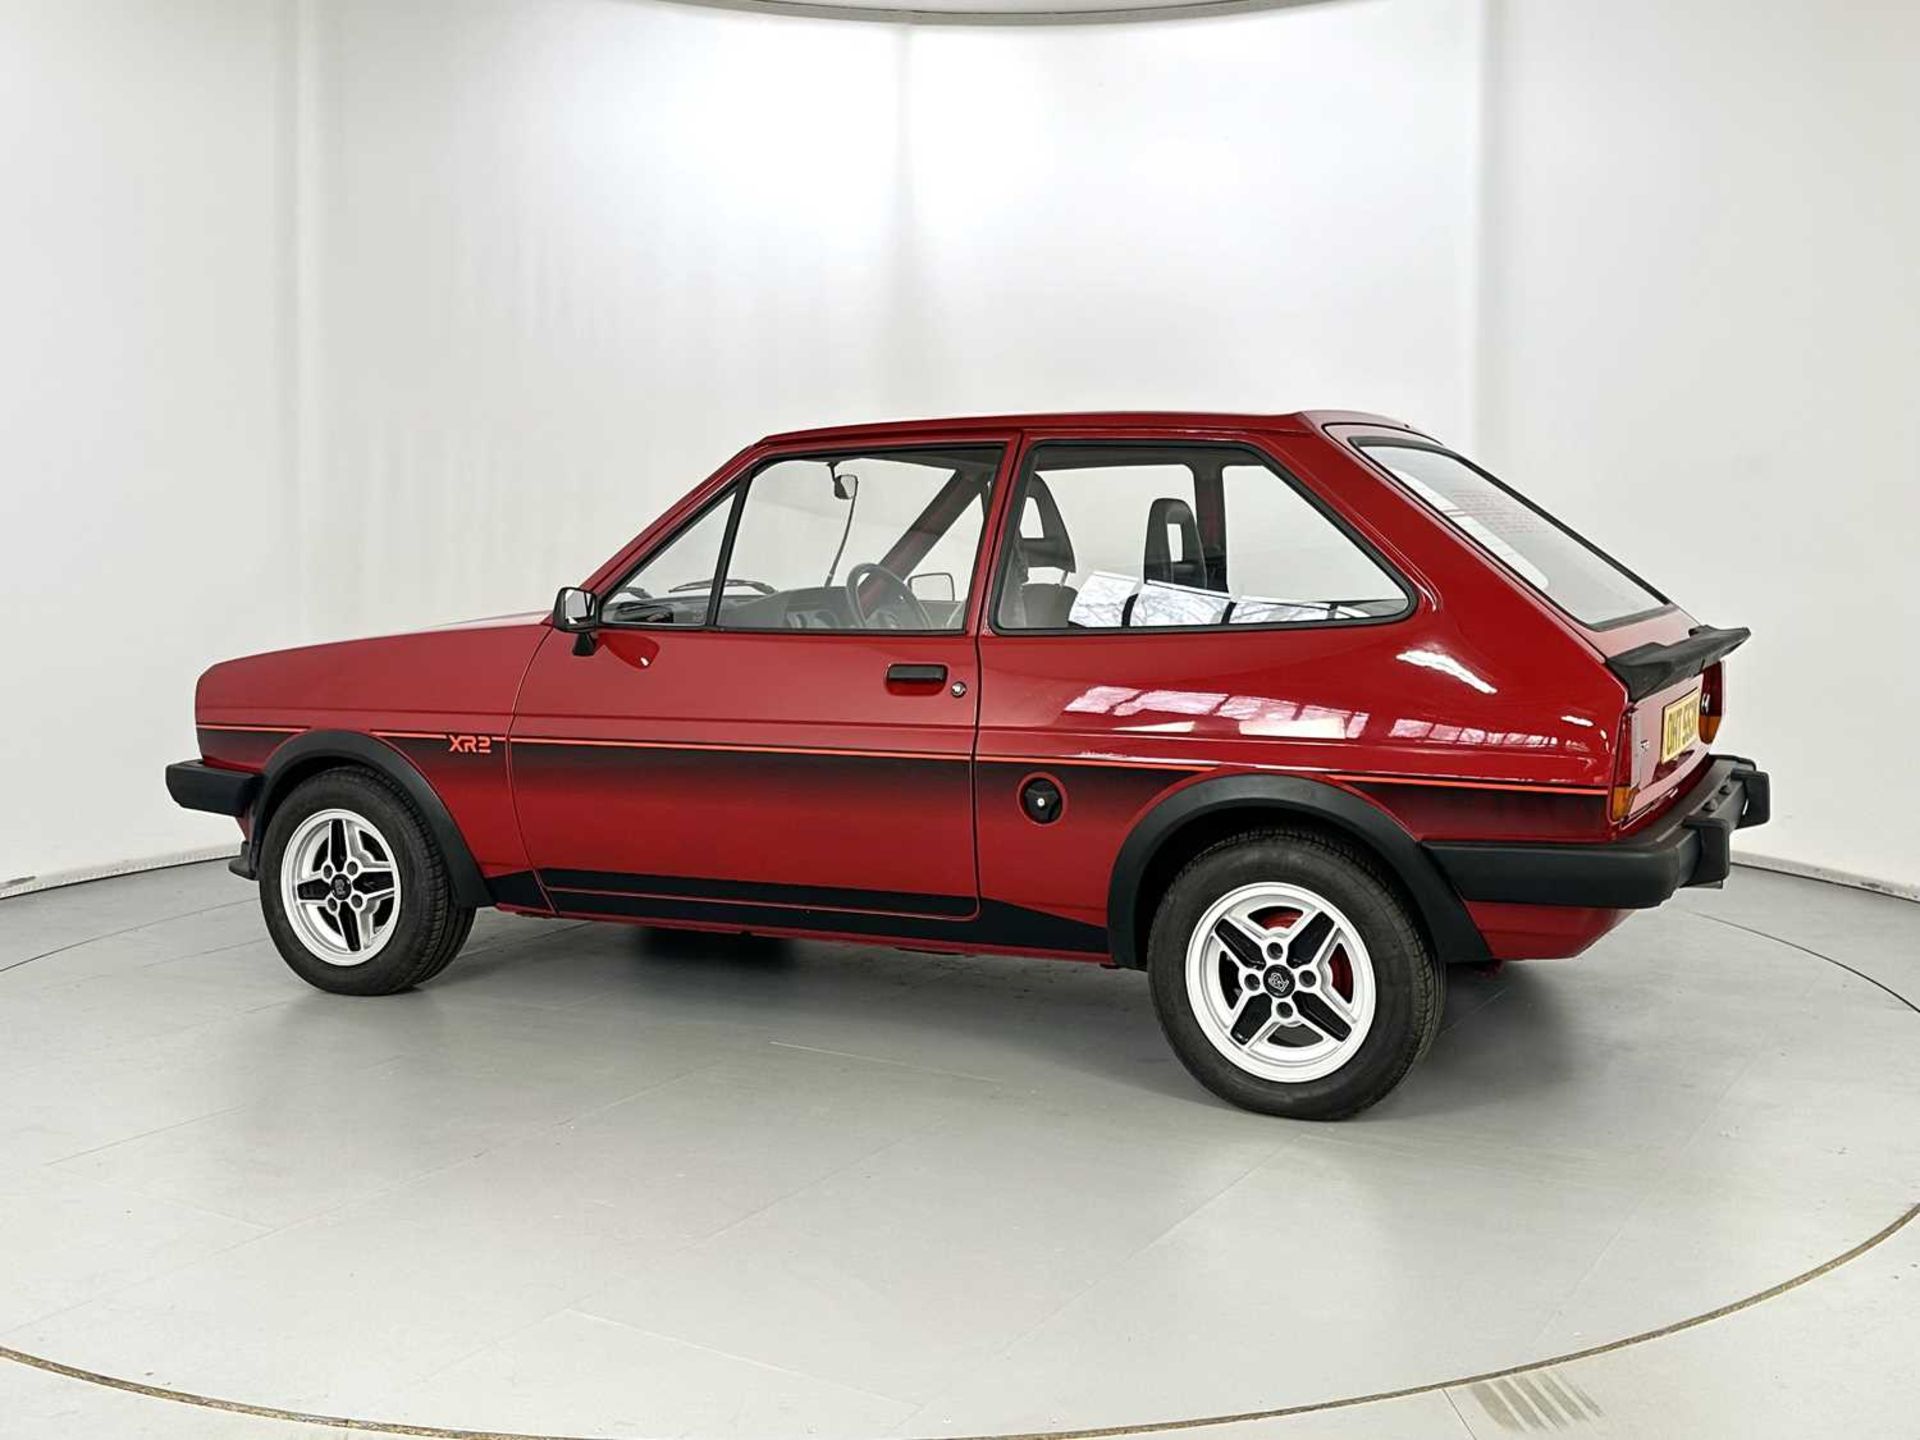 1983 Ford Fiesta - Image 6 of 31